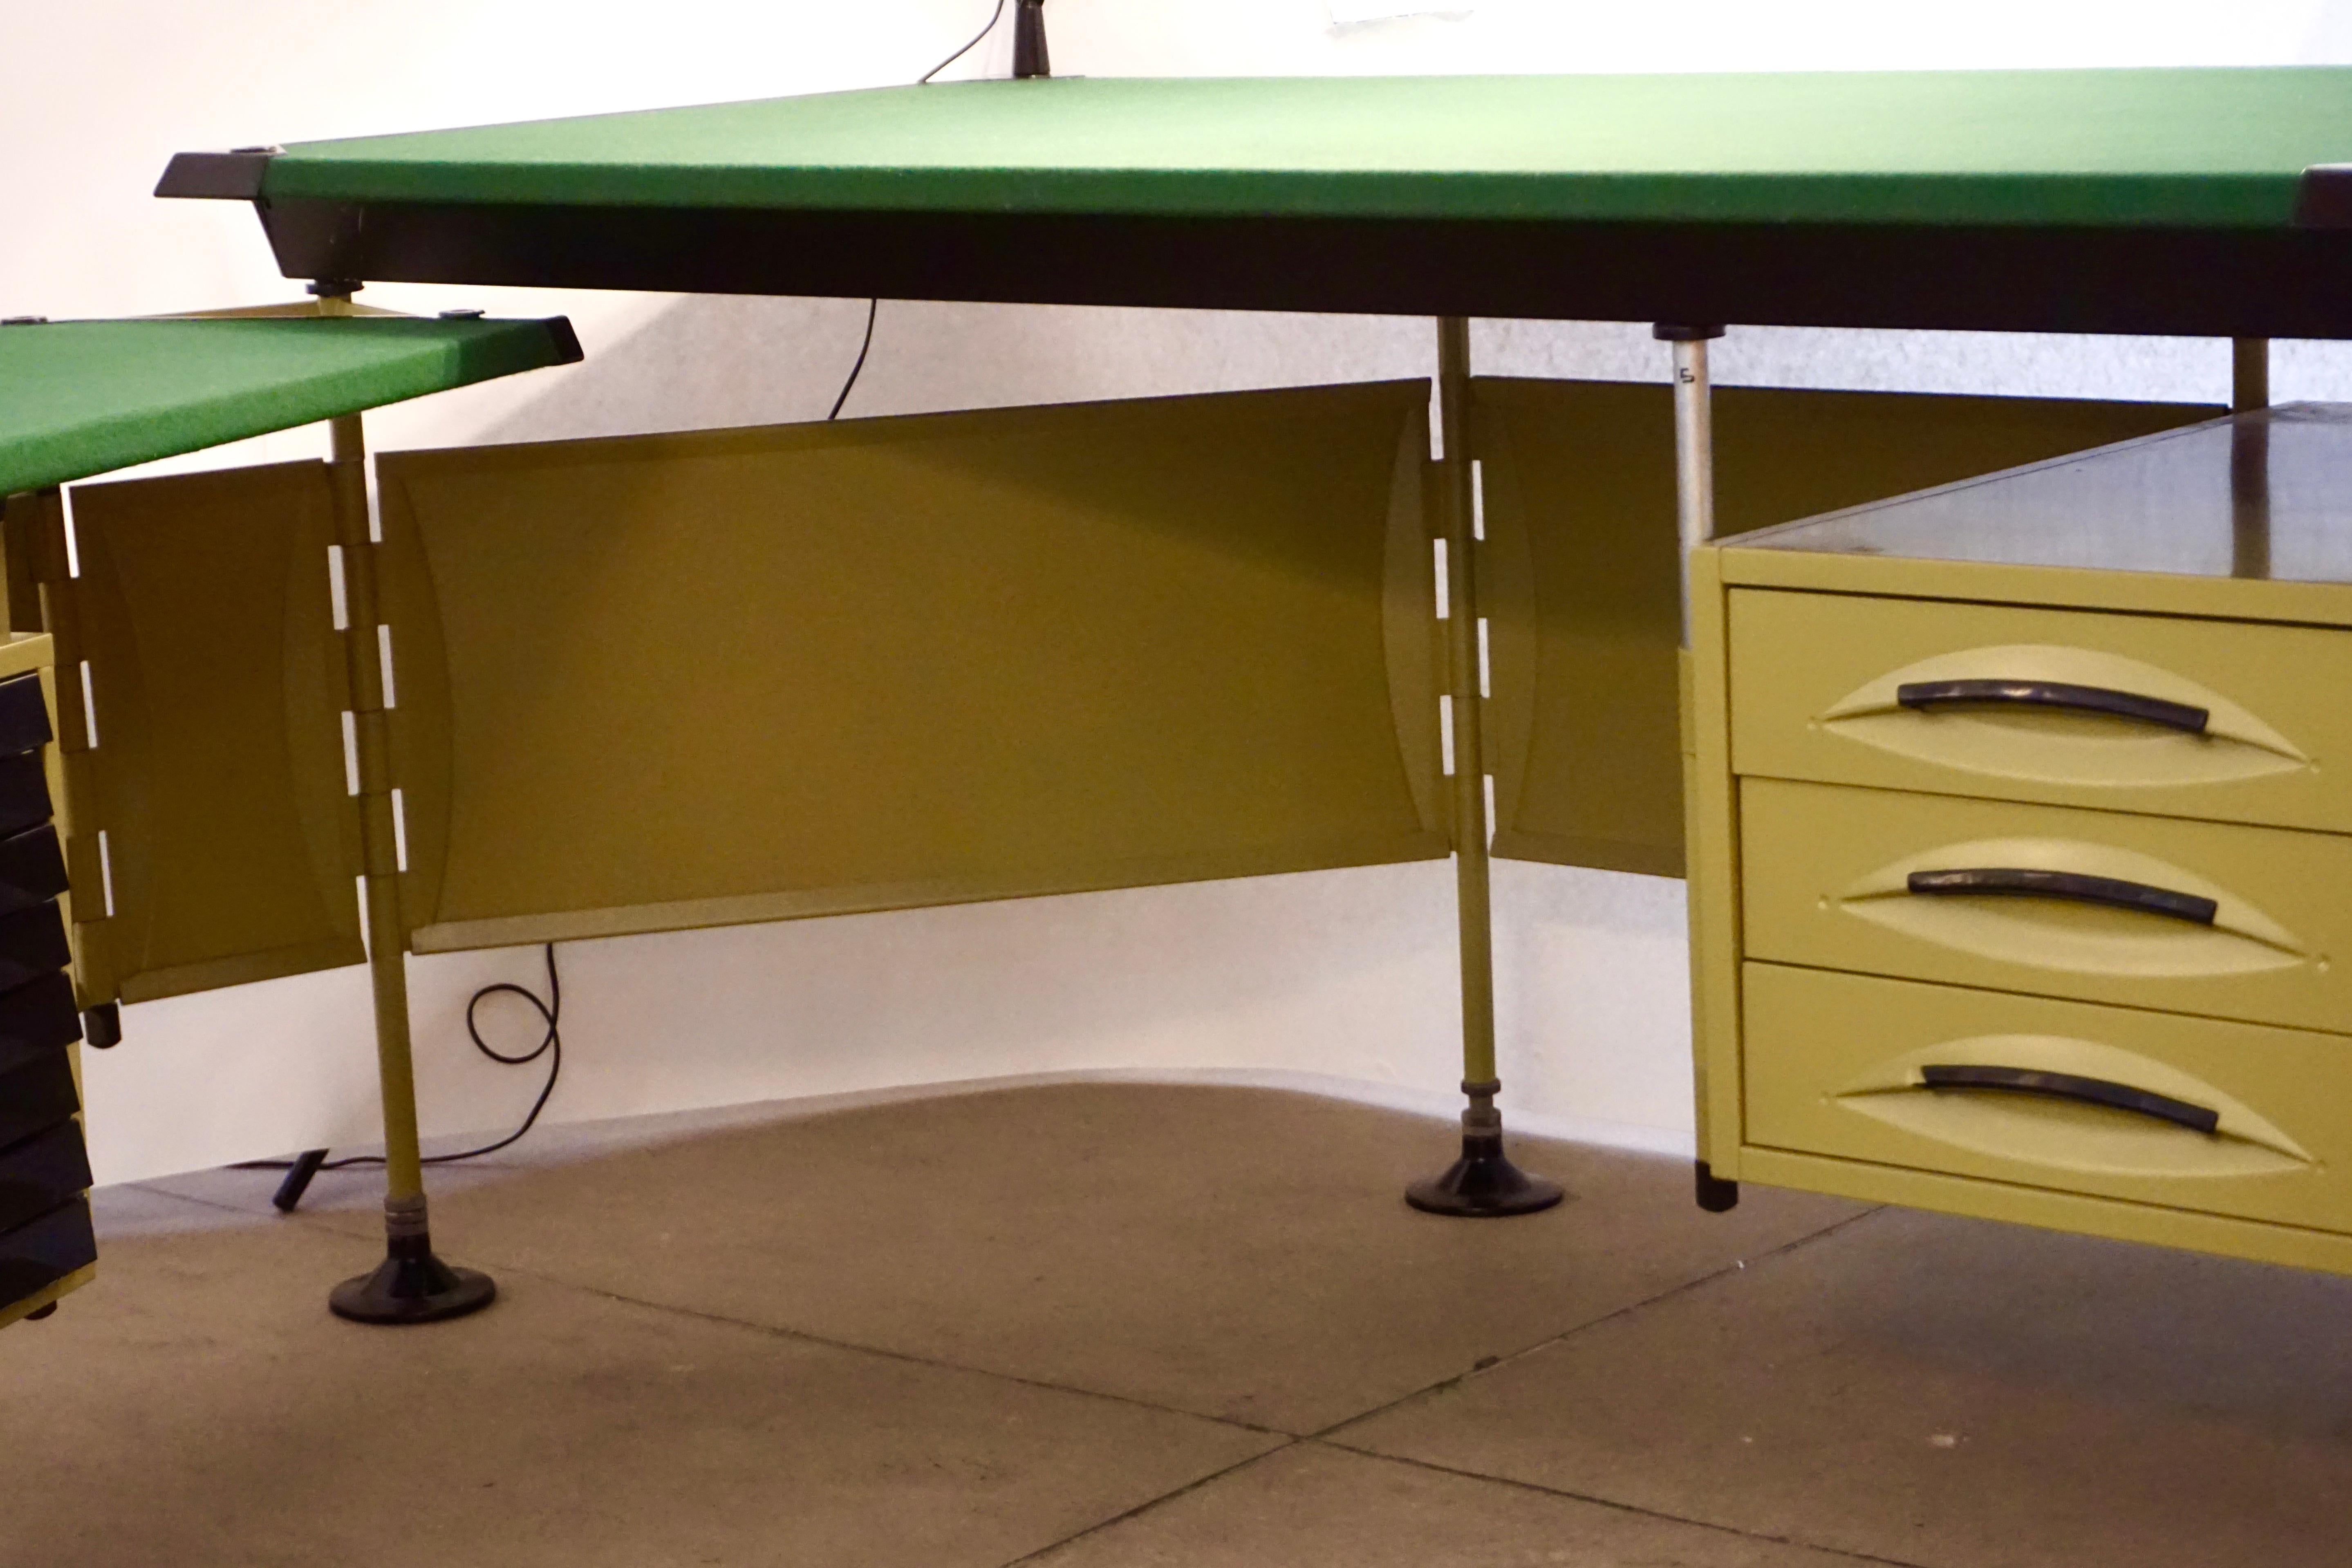 Metal BBPR for Olivetti 1960 Green Modernist Desk with Black Accents and Side Bureau